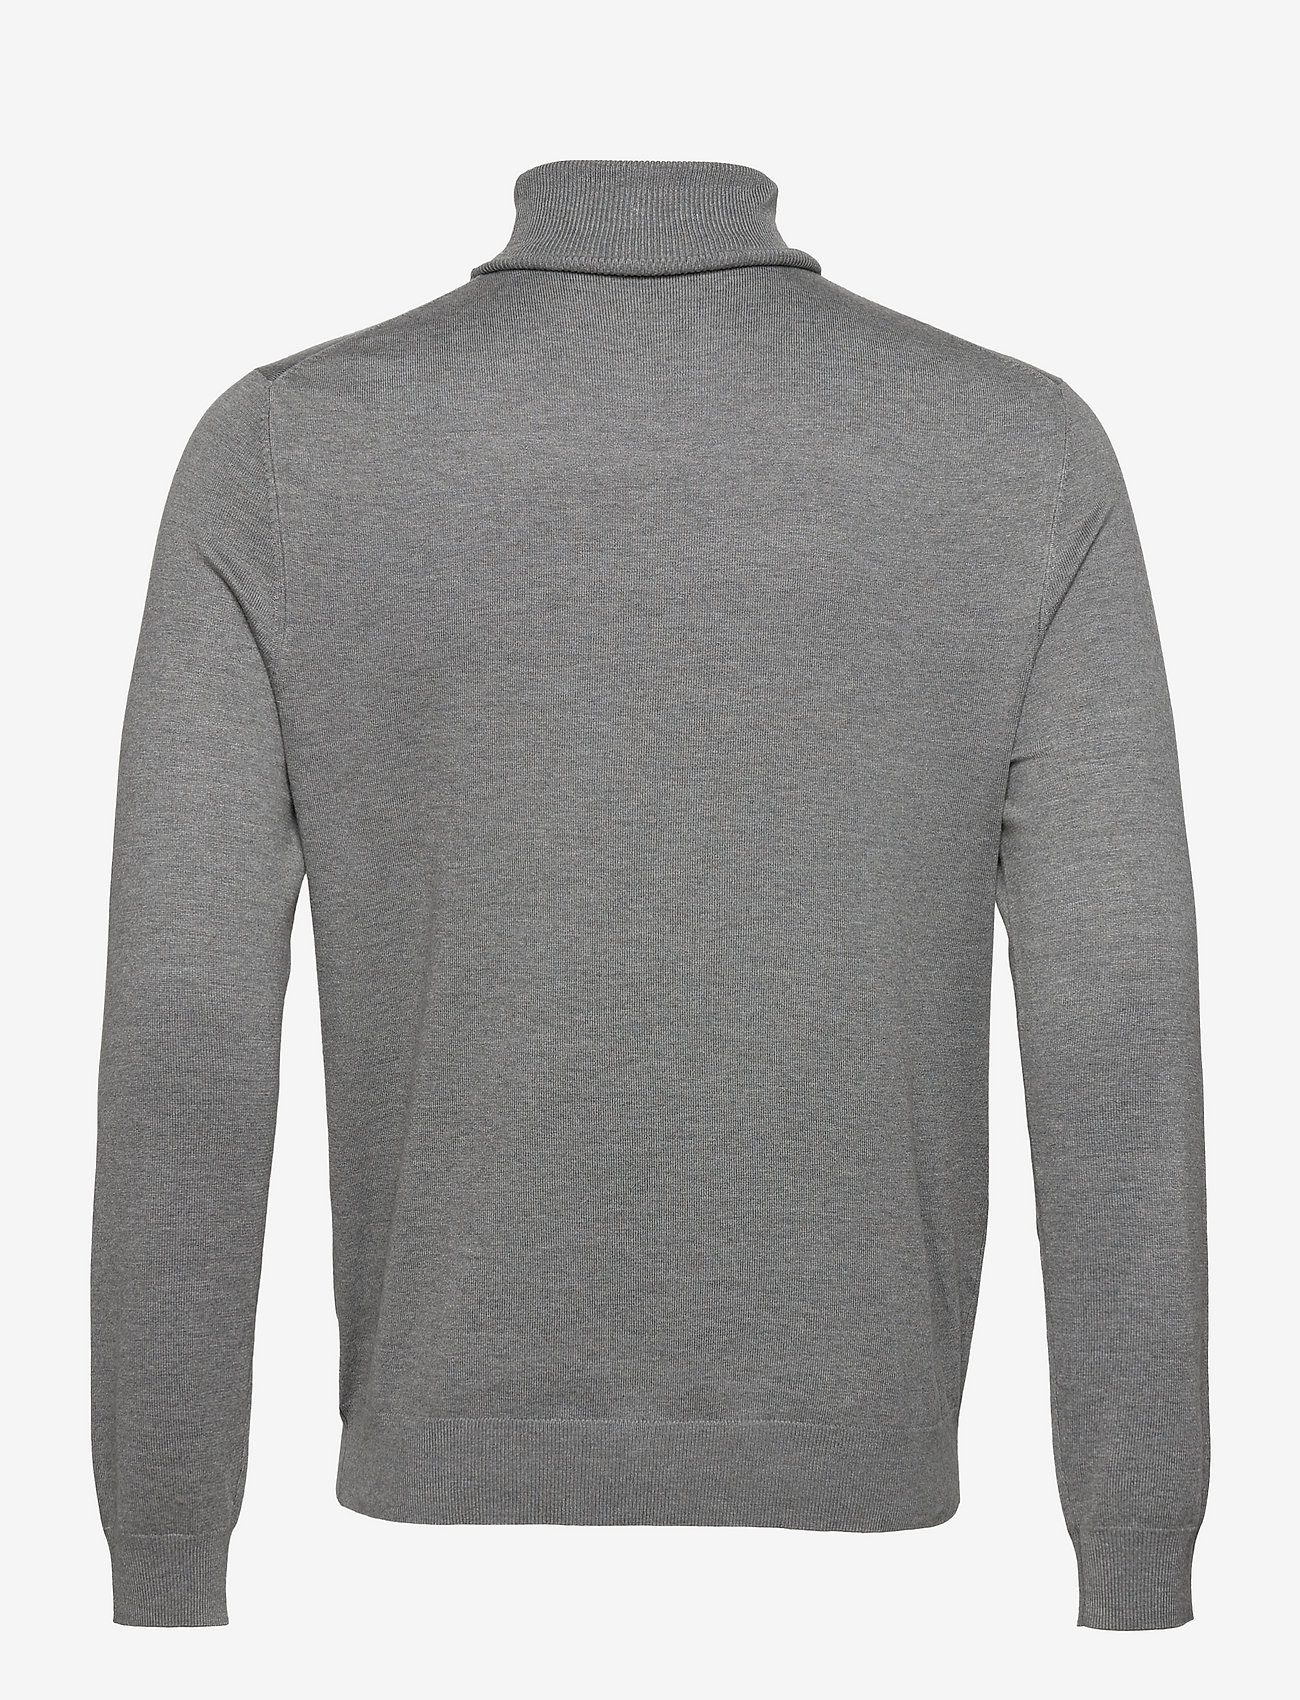 ONLY & SONS - ONSWYLER LIFE ROLL NECK KNIT - lowest prices - medium grey melange - 1